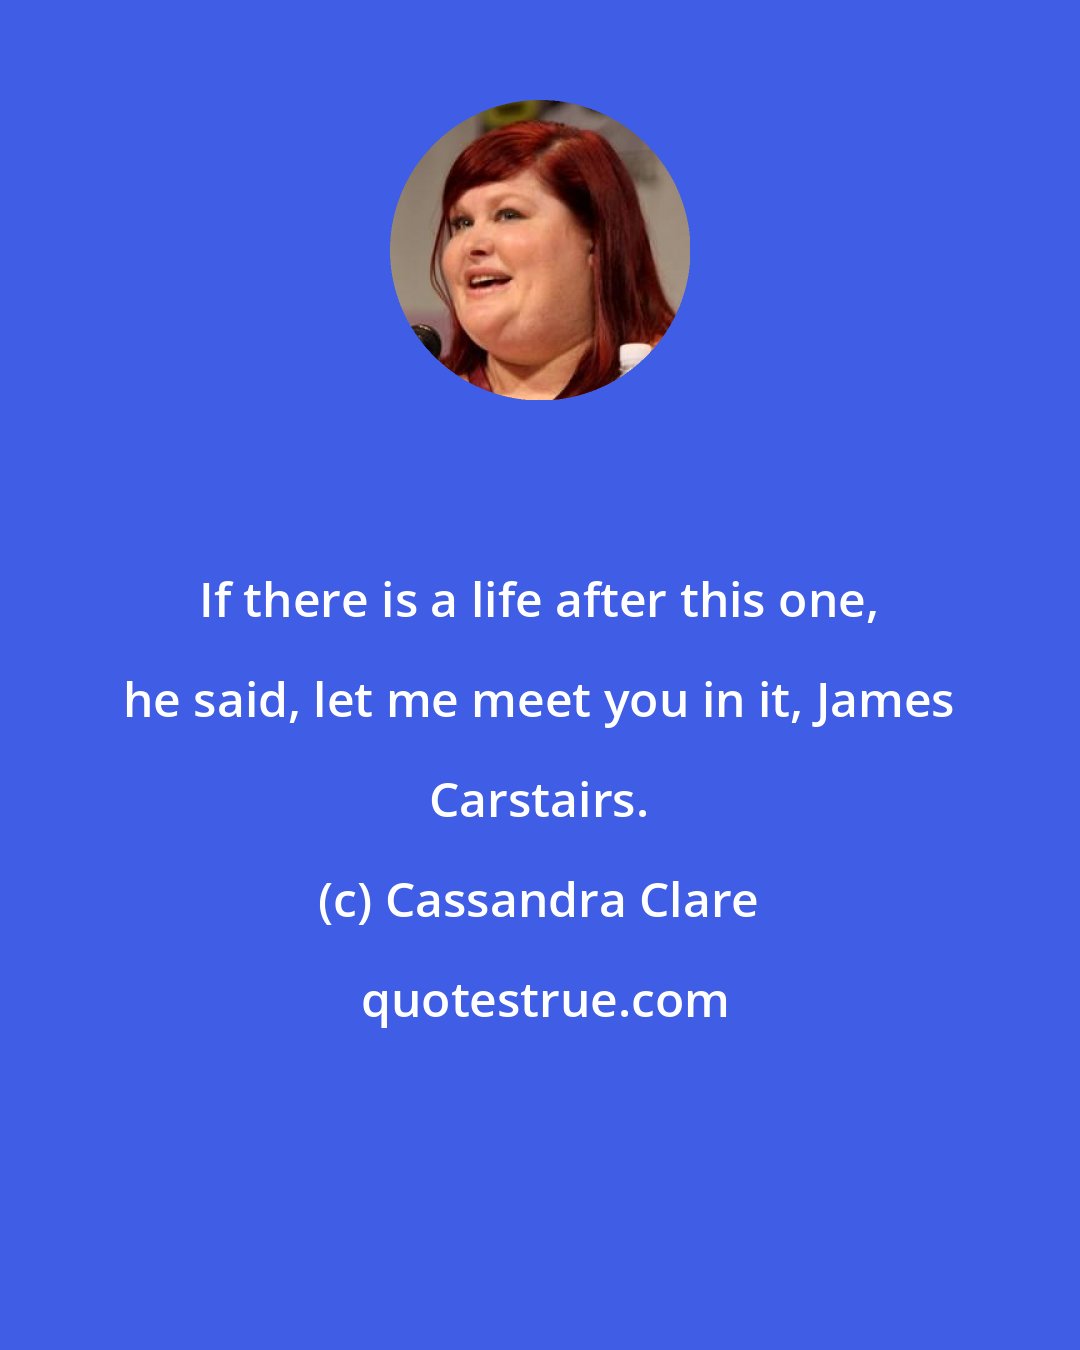 Cassandra Clare: If there is a life after this one, he said, let me meet you in it, James Carstairs.